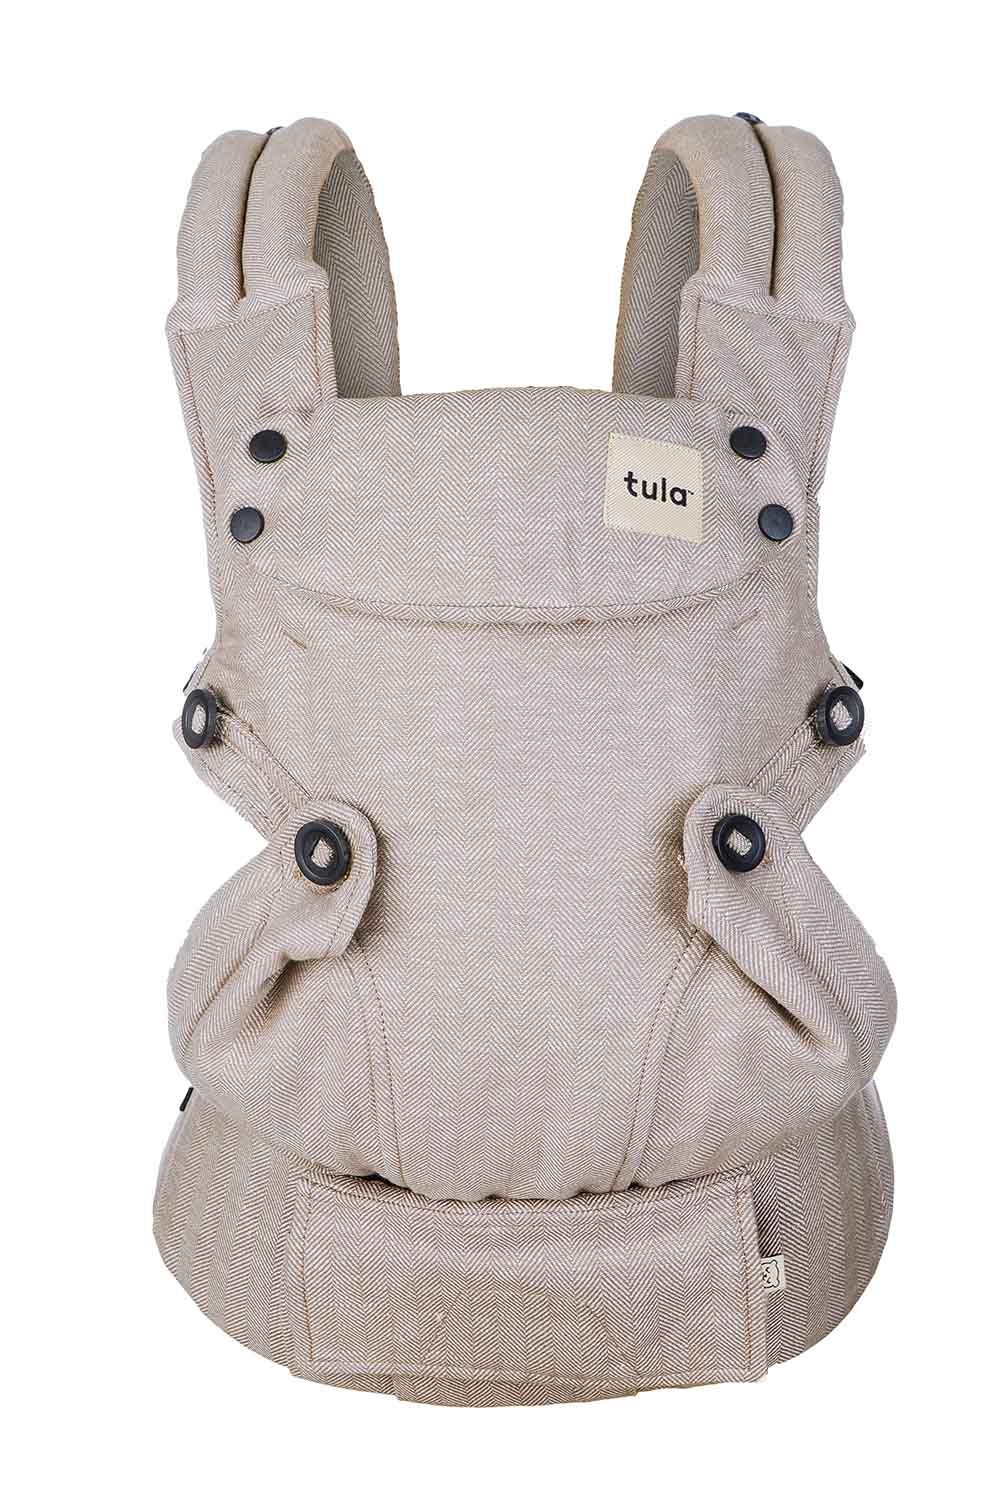 Linen Explore Baby Carrier in Sand Tan - Baby Tula Linen Collection | Baby Tula